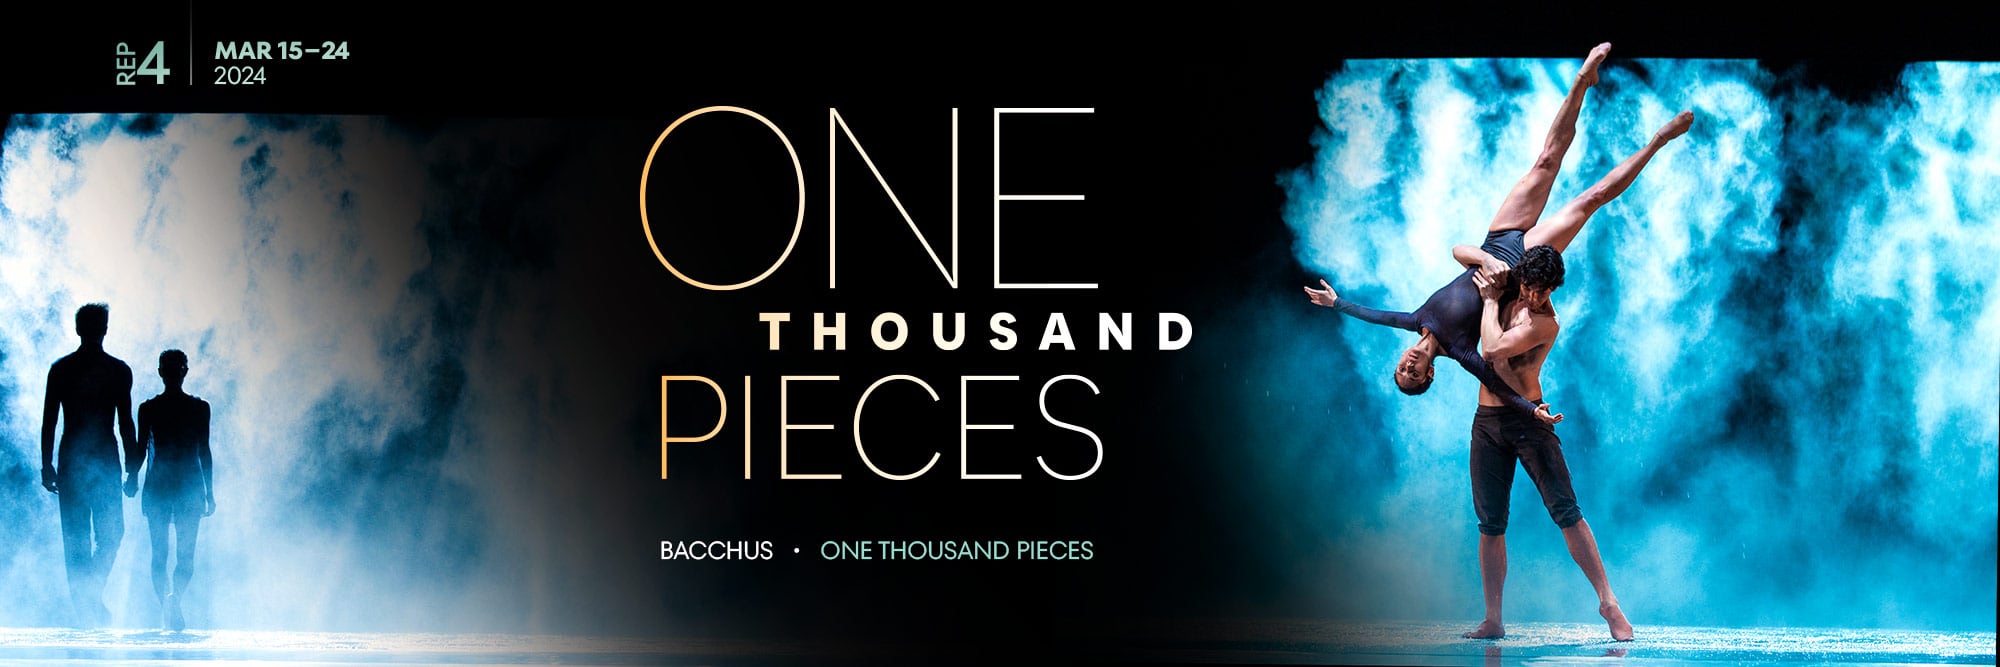 One Thousand Pieces, March 15-24, 2024